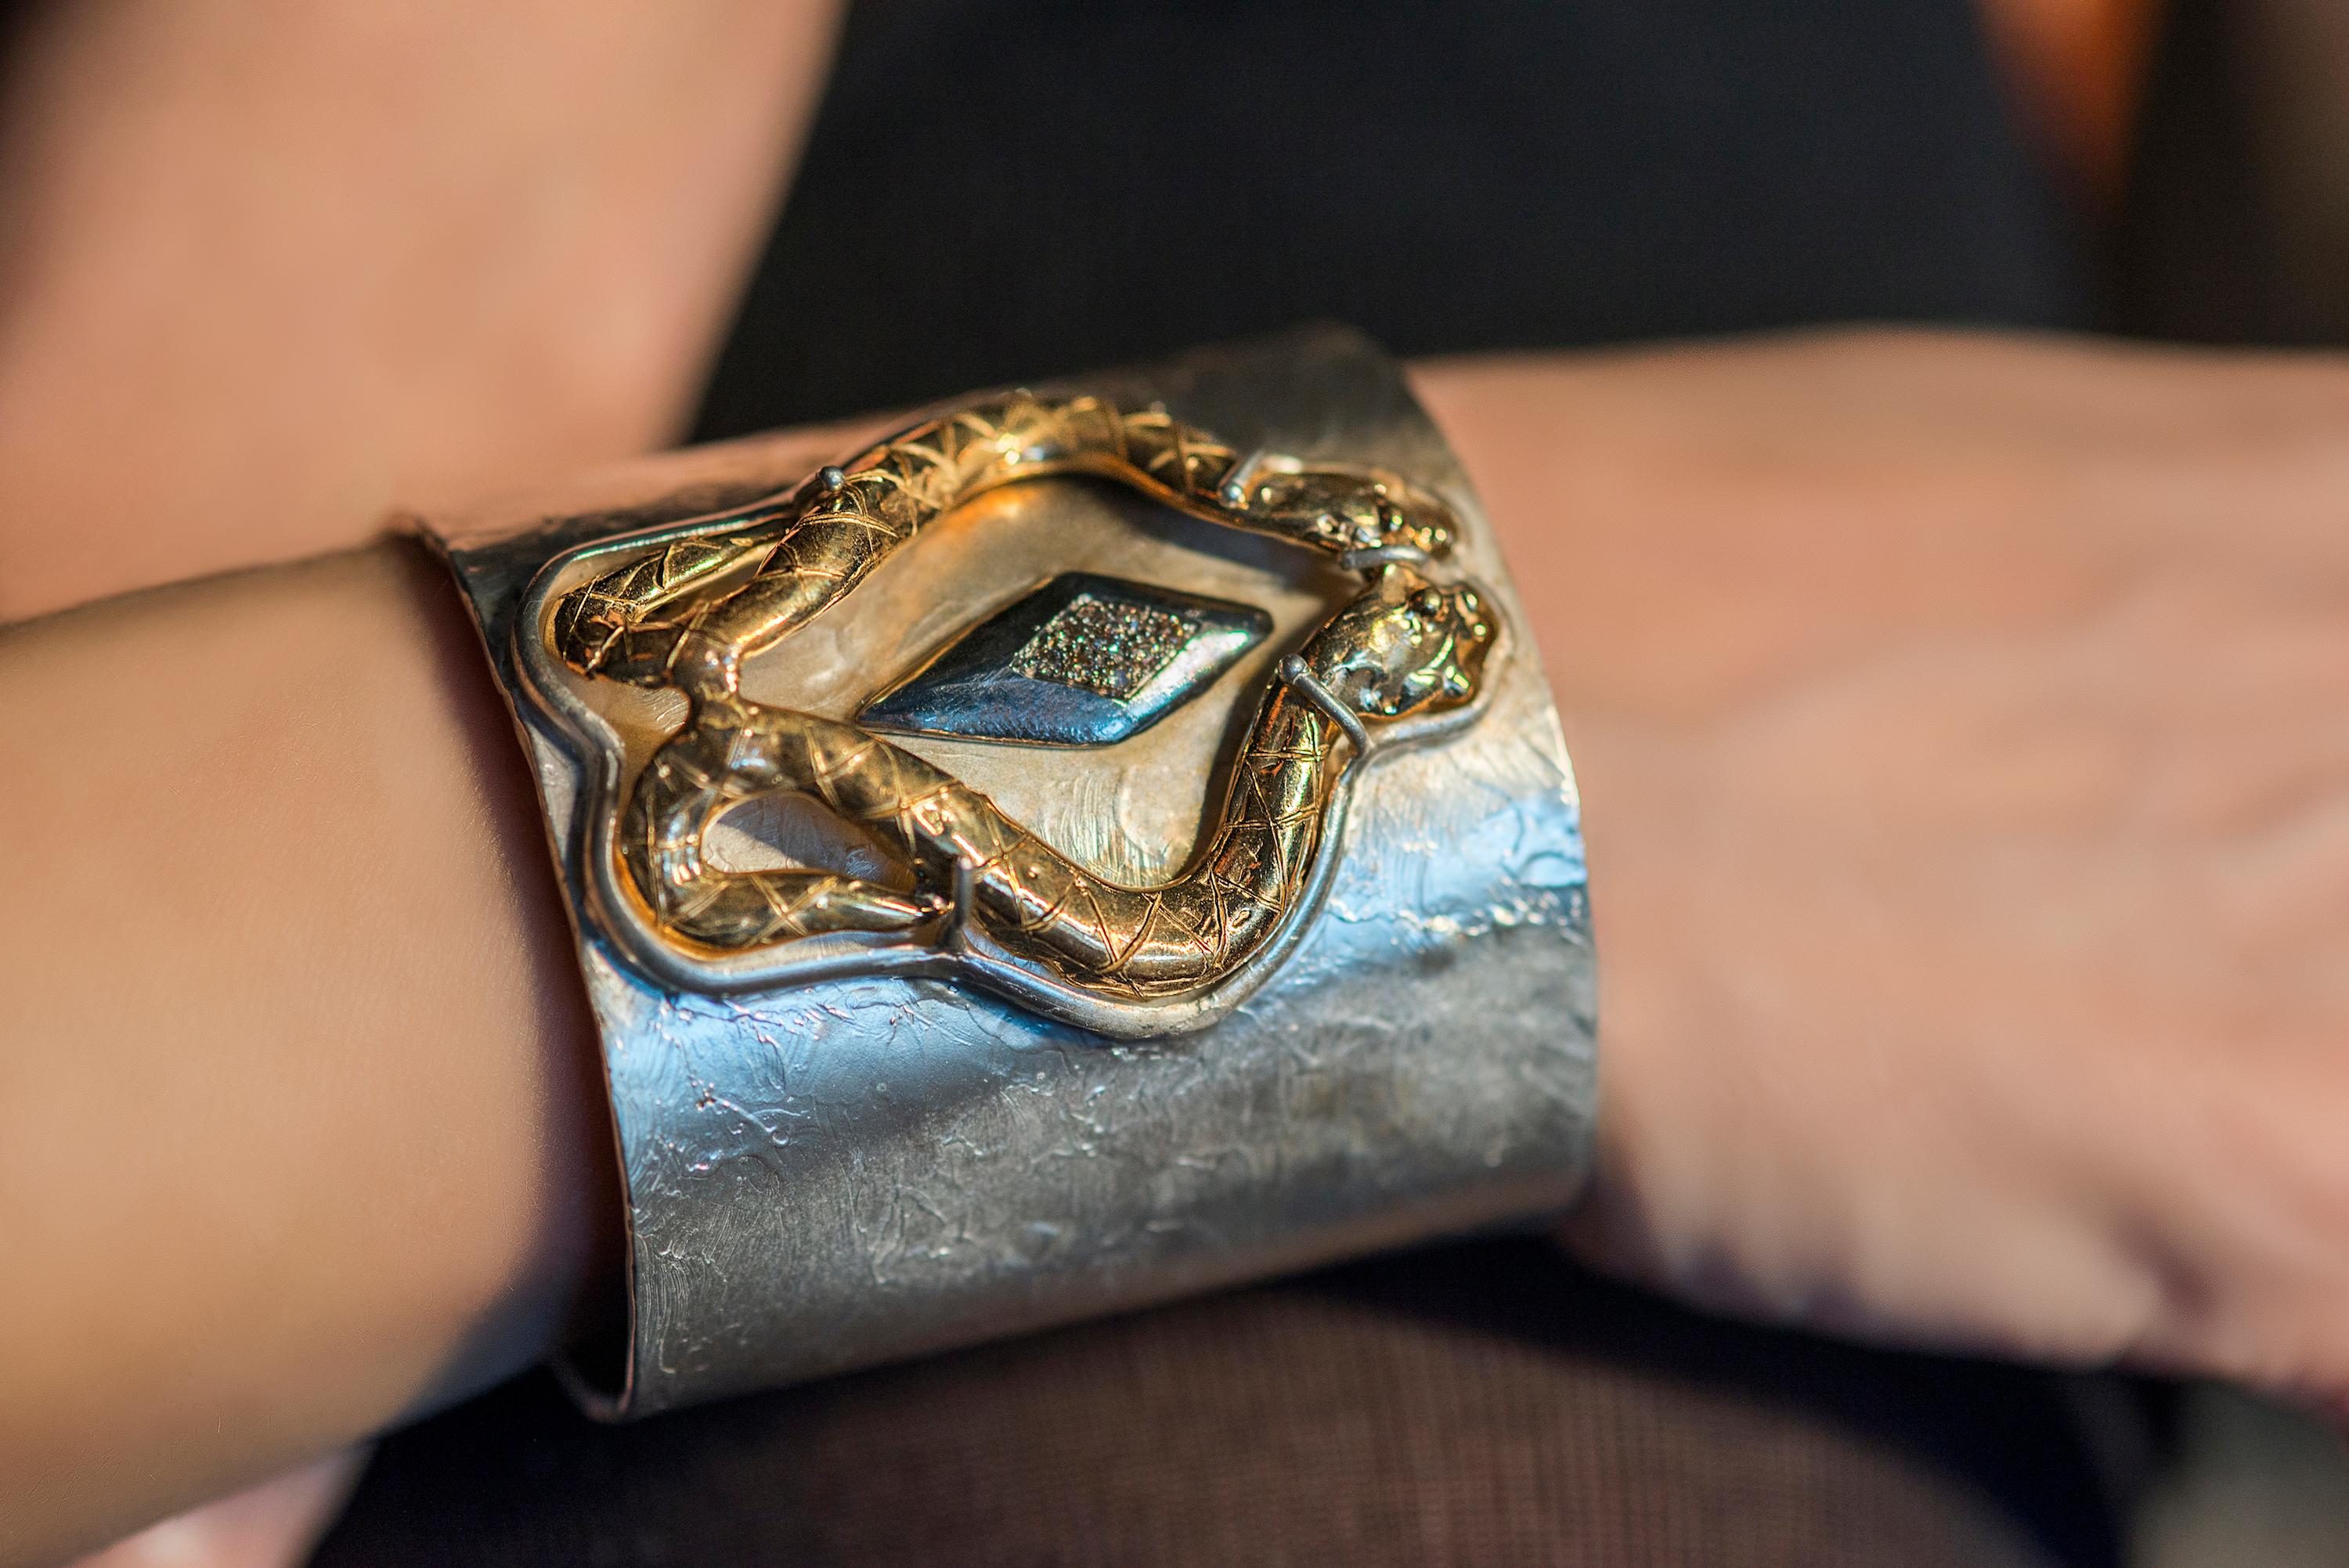 Introducing the mesmerizing Snake Cuff Bracelet by Rossella Ugolini, a unique piece handcrafted in Italy. This fierce and sensual cuff bracelet exudes an air of captivating elegance, adorned with exquisite details. Crafted in 24 Karat Gold Plated